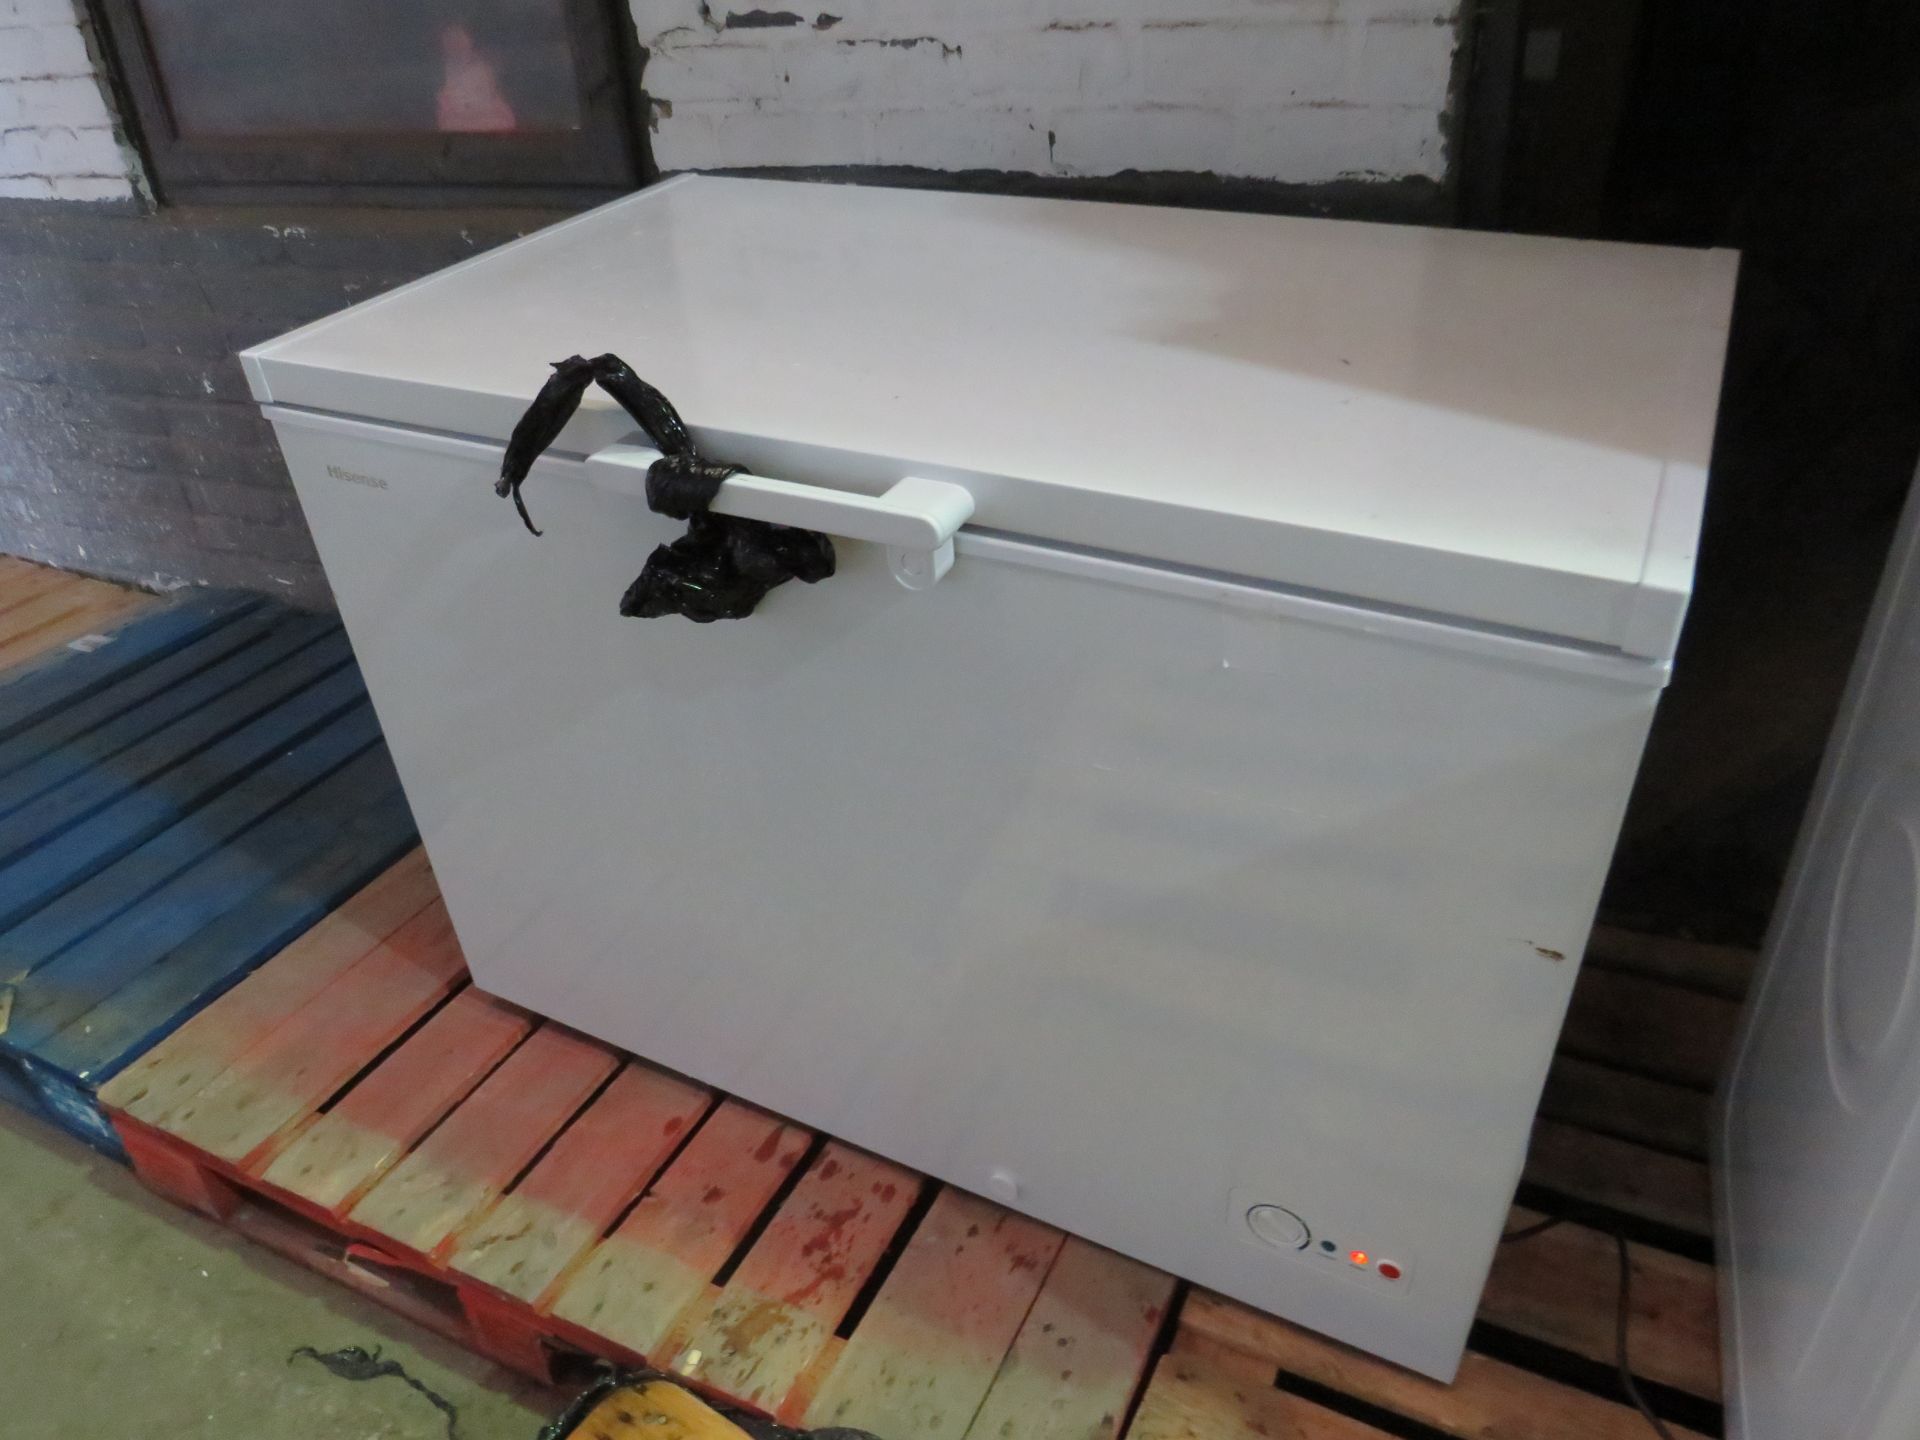 HiSense freezer chest, Powers on and the fan sounds like its working but it doesnt get cold